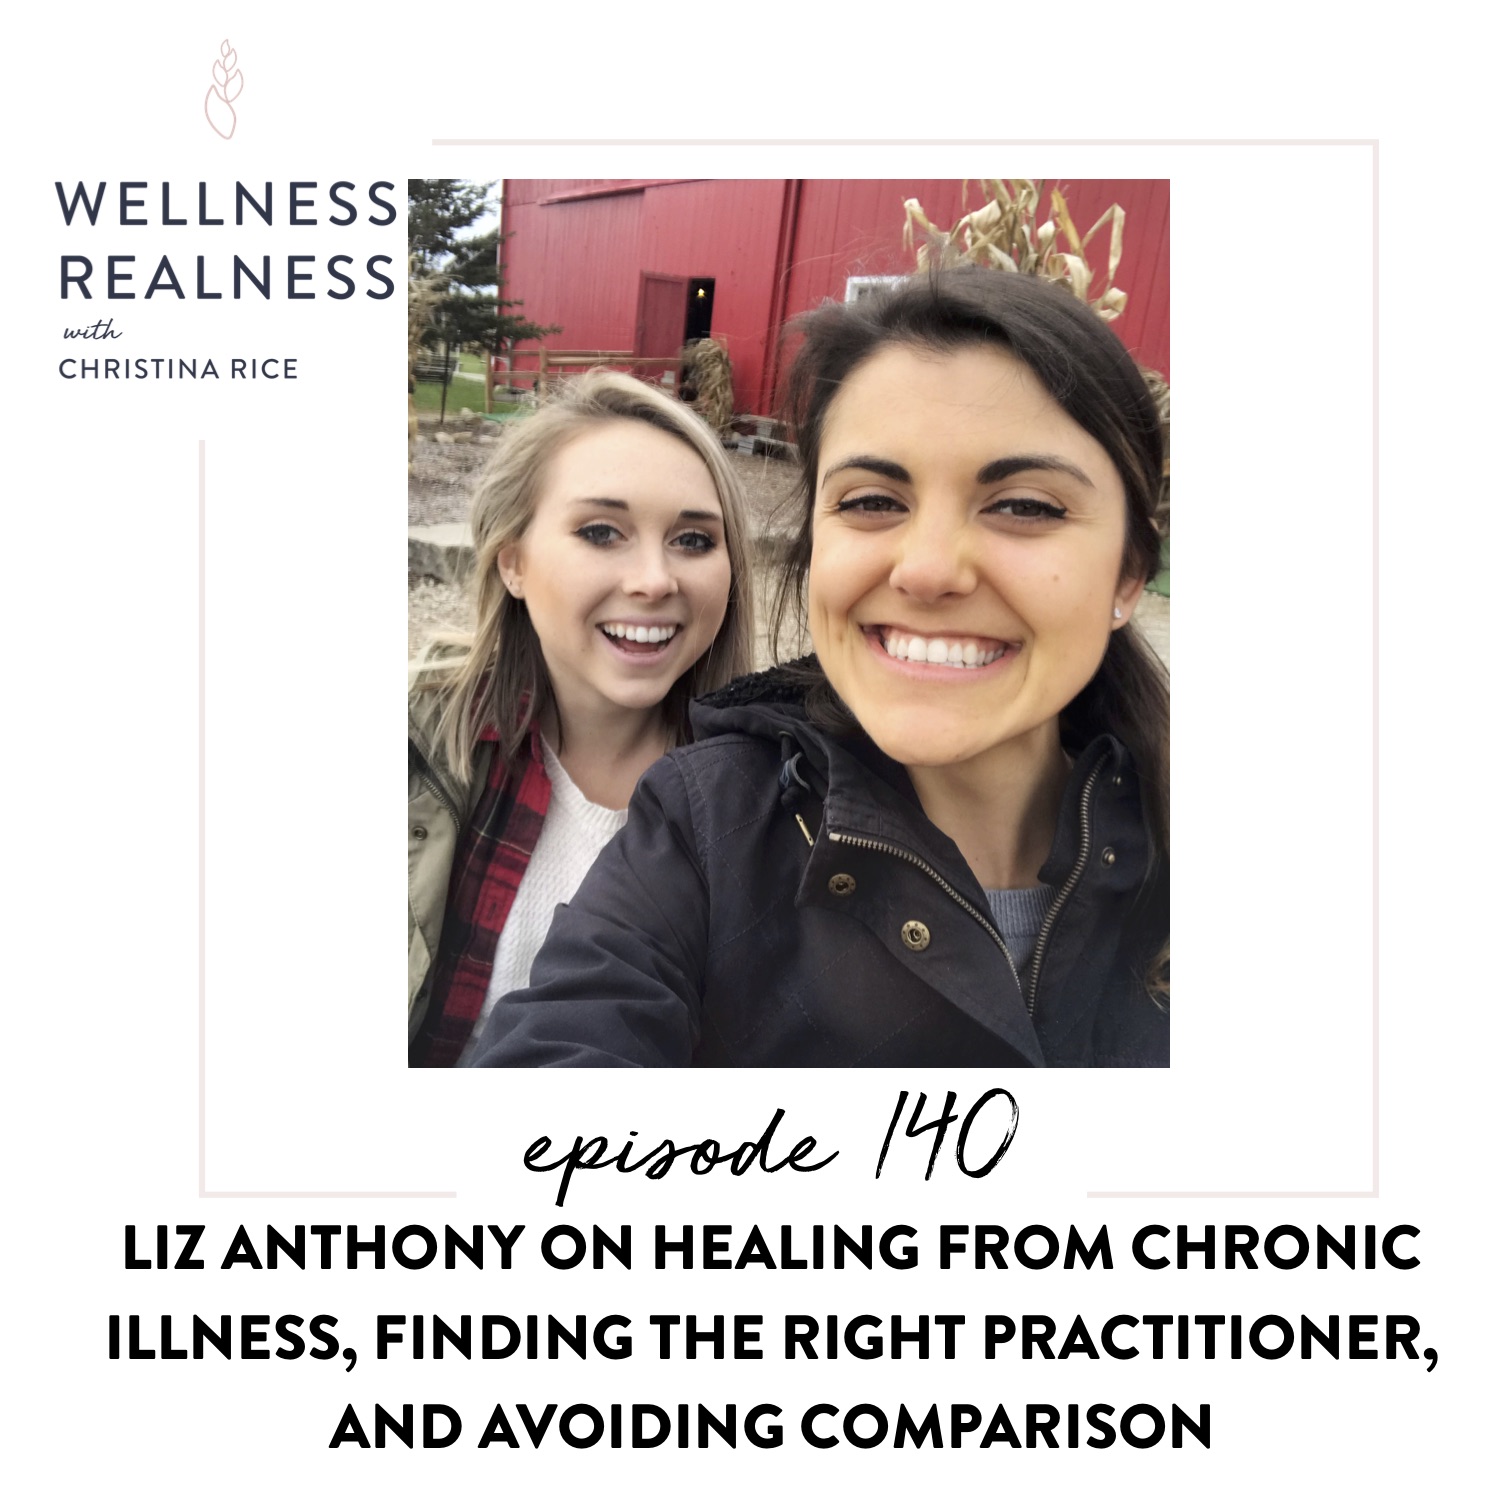 140: Liz Anthony on Healing from Chronic Illness, Finding the Right Practitioner, and Avoiding Comparison